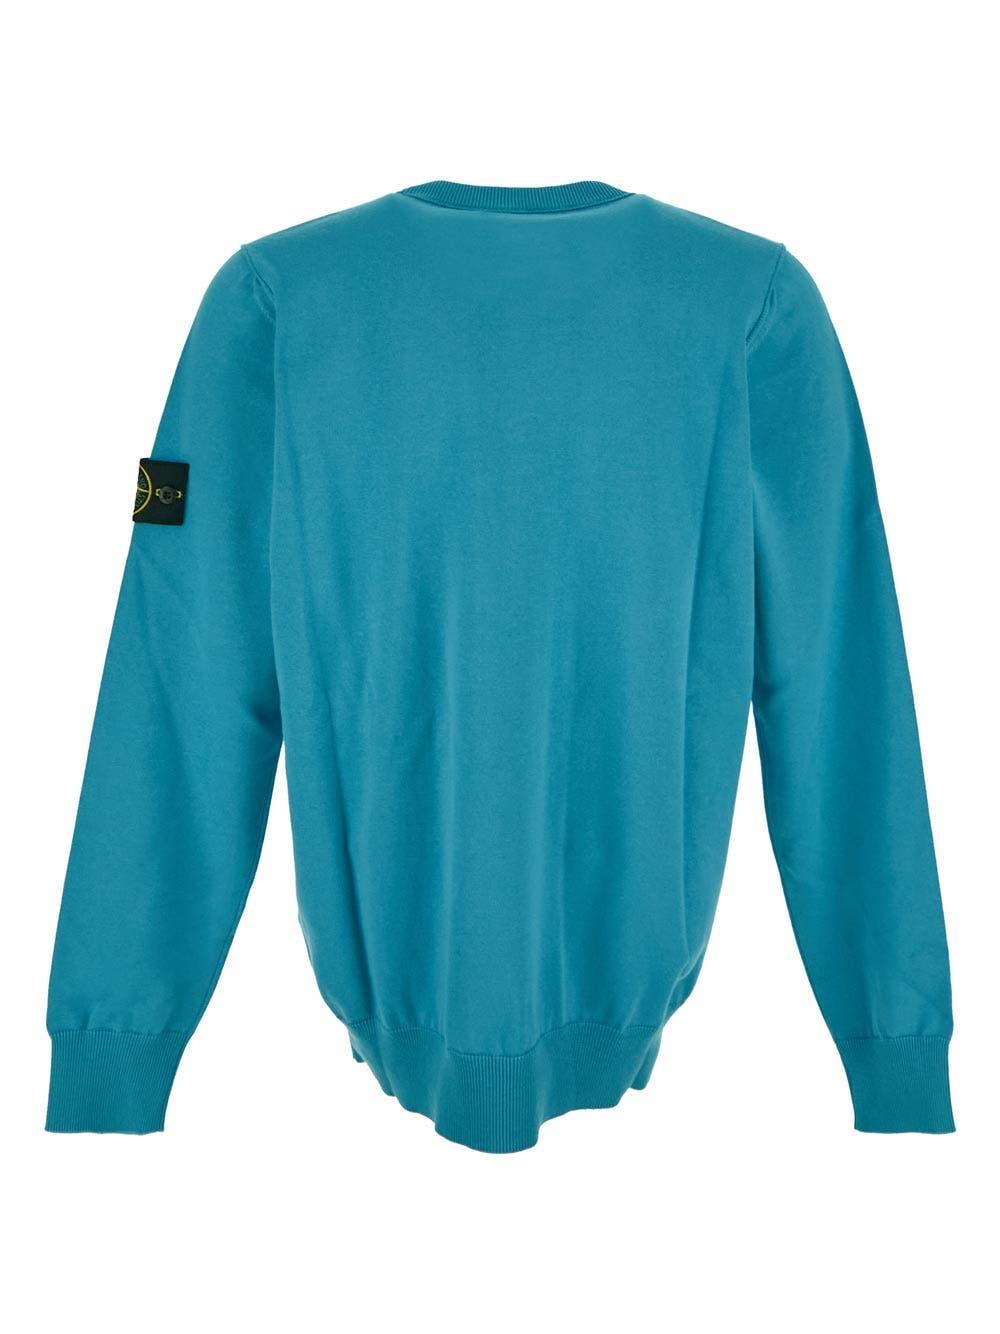 Stone Island Turquoise Sweater in Blue for Men | Lyst